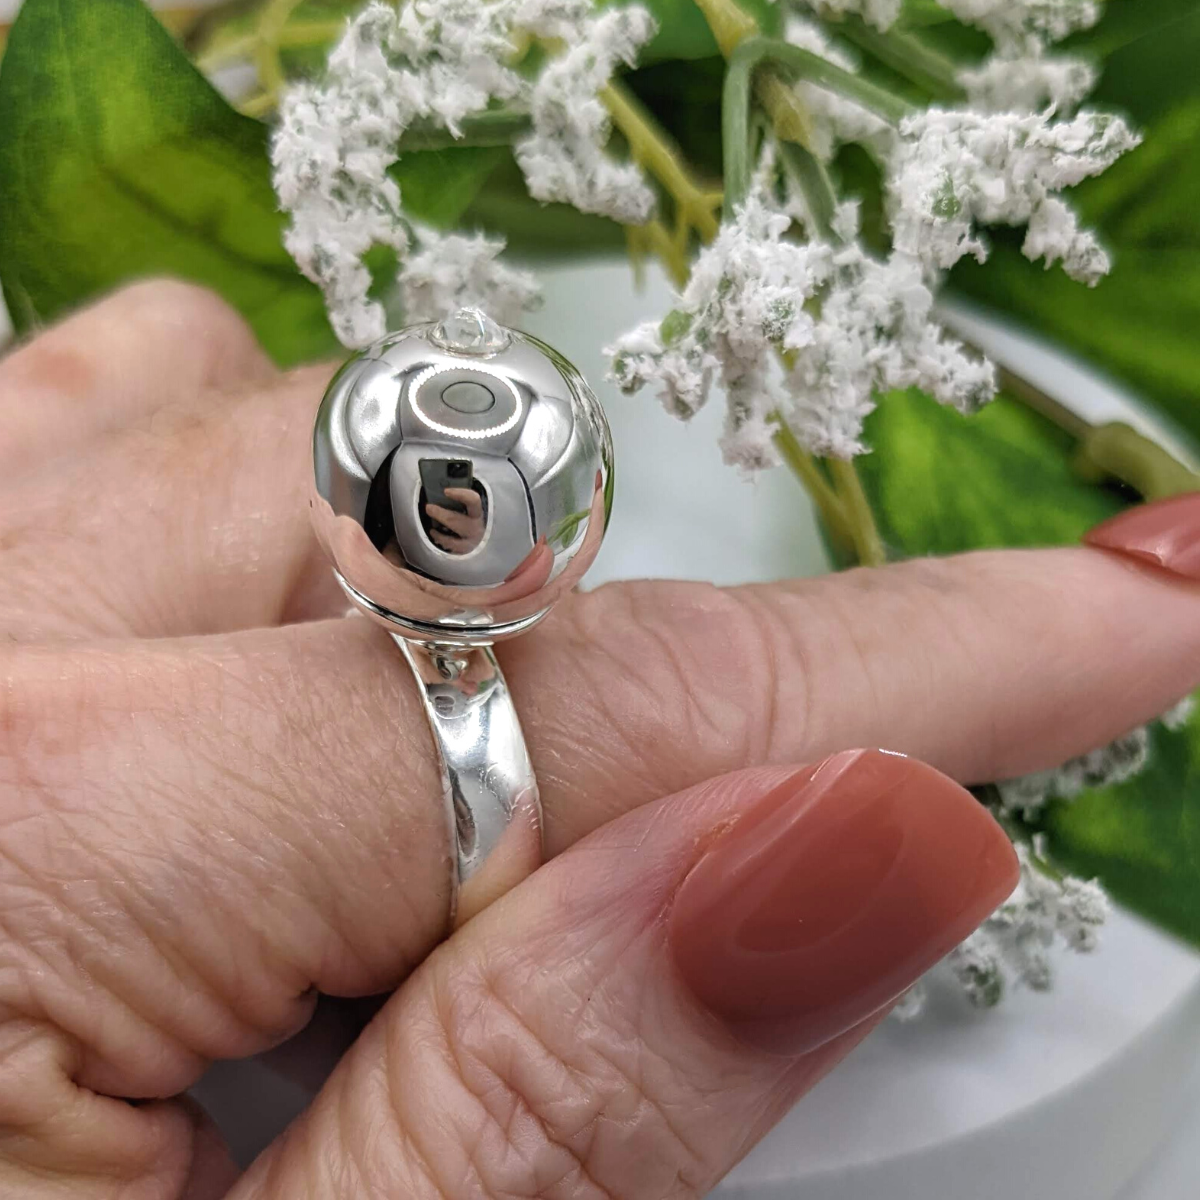 Zirconia Orb Sterling Silver Ring - Nature Reflections